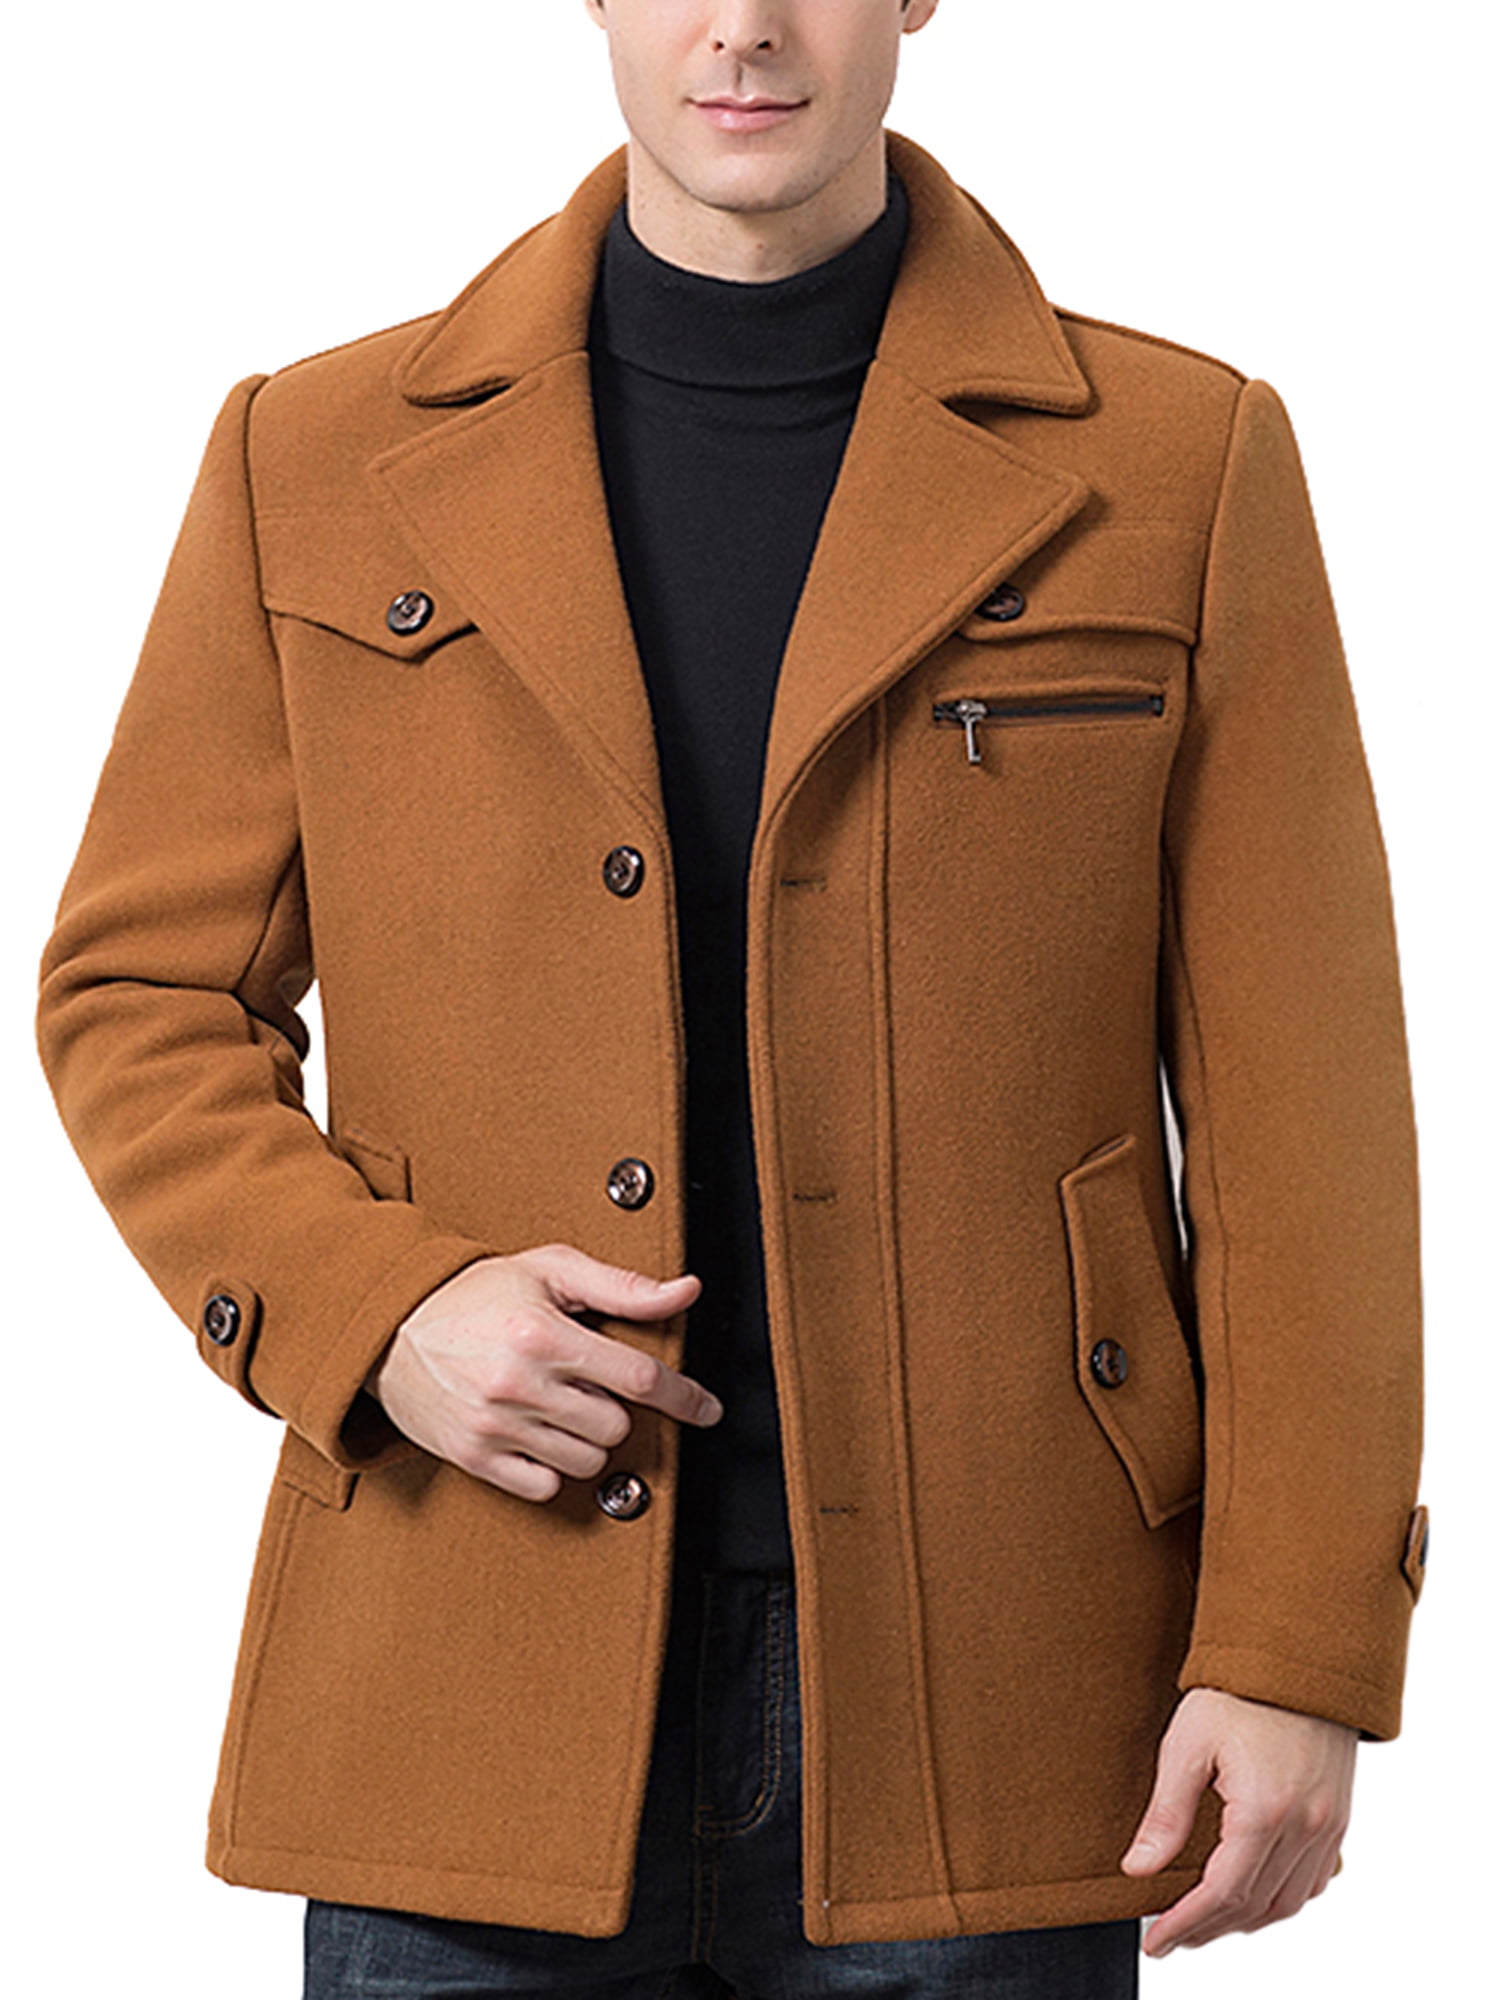 Mens Lapel Cotton Blend Jackets Parka Single Breast Casual Outwear Trench Coat